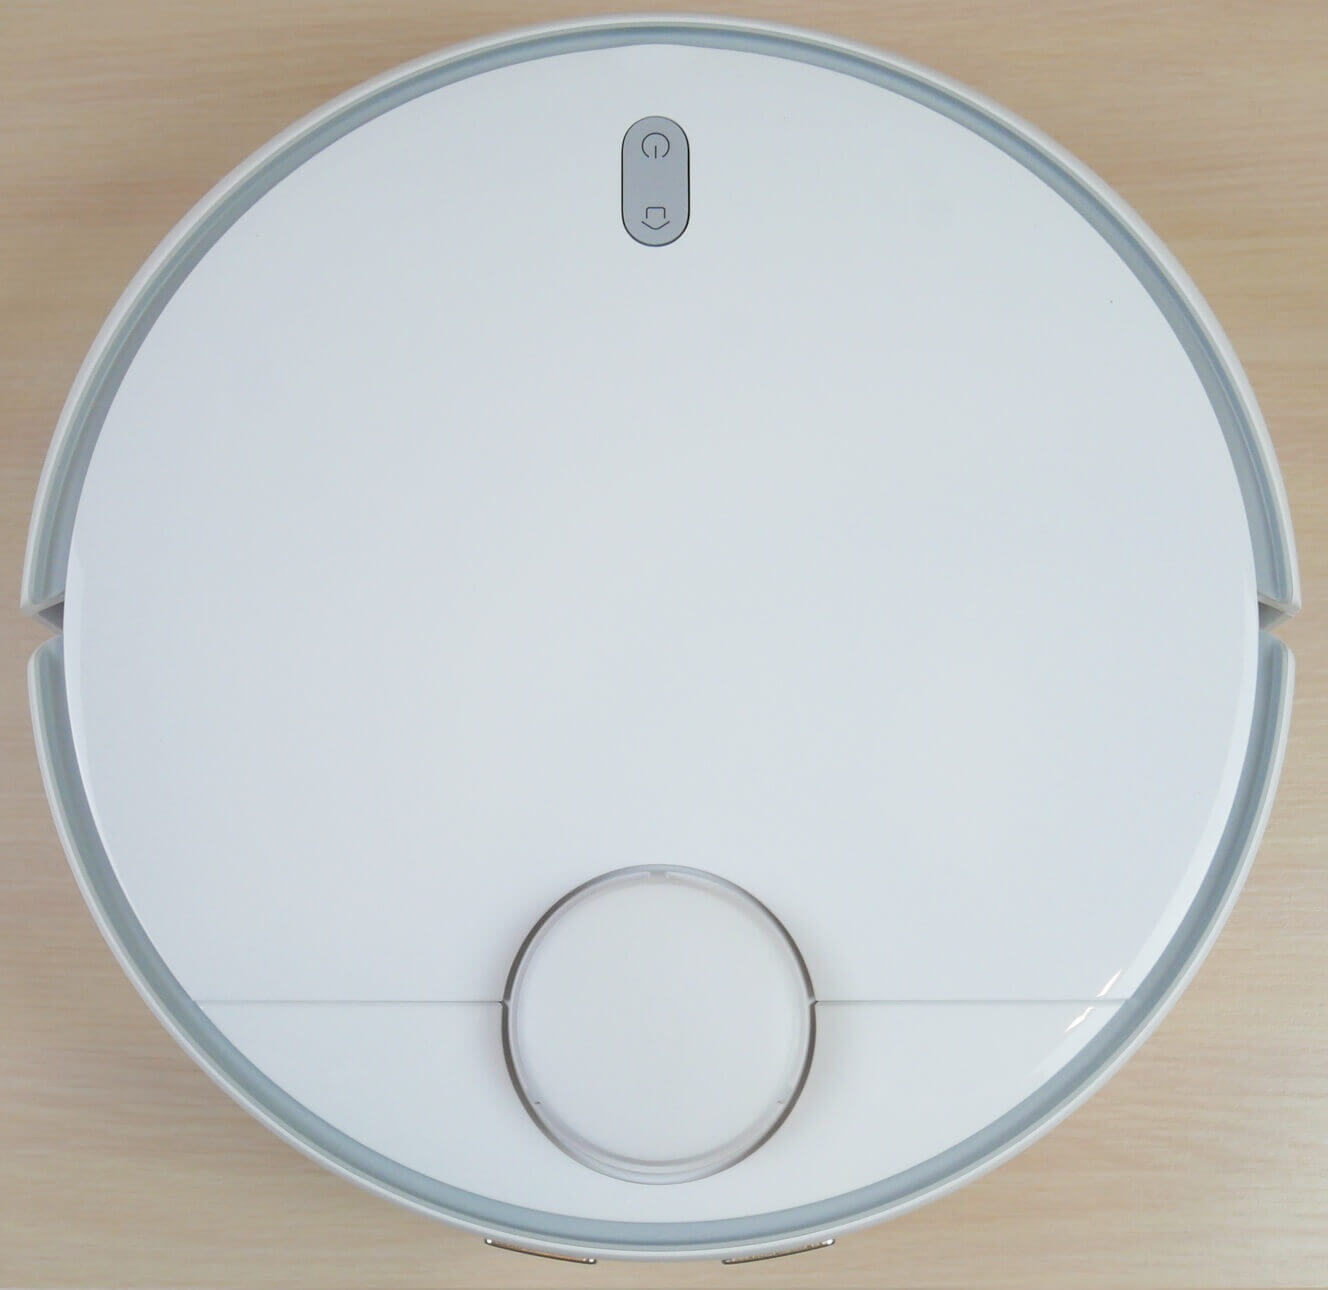 Вид сверху Xiaomi Mijia Self-Cleaning Sweeping Mopping Robot MJSTP